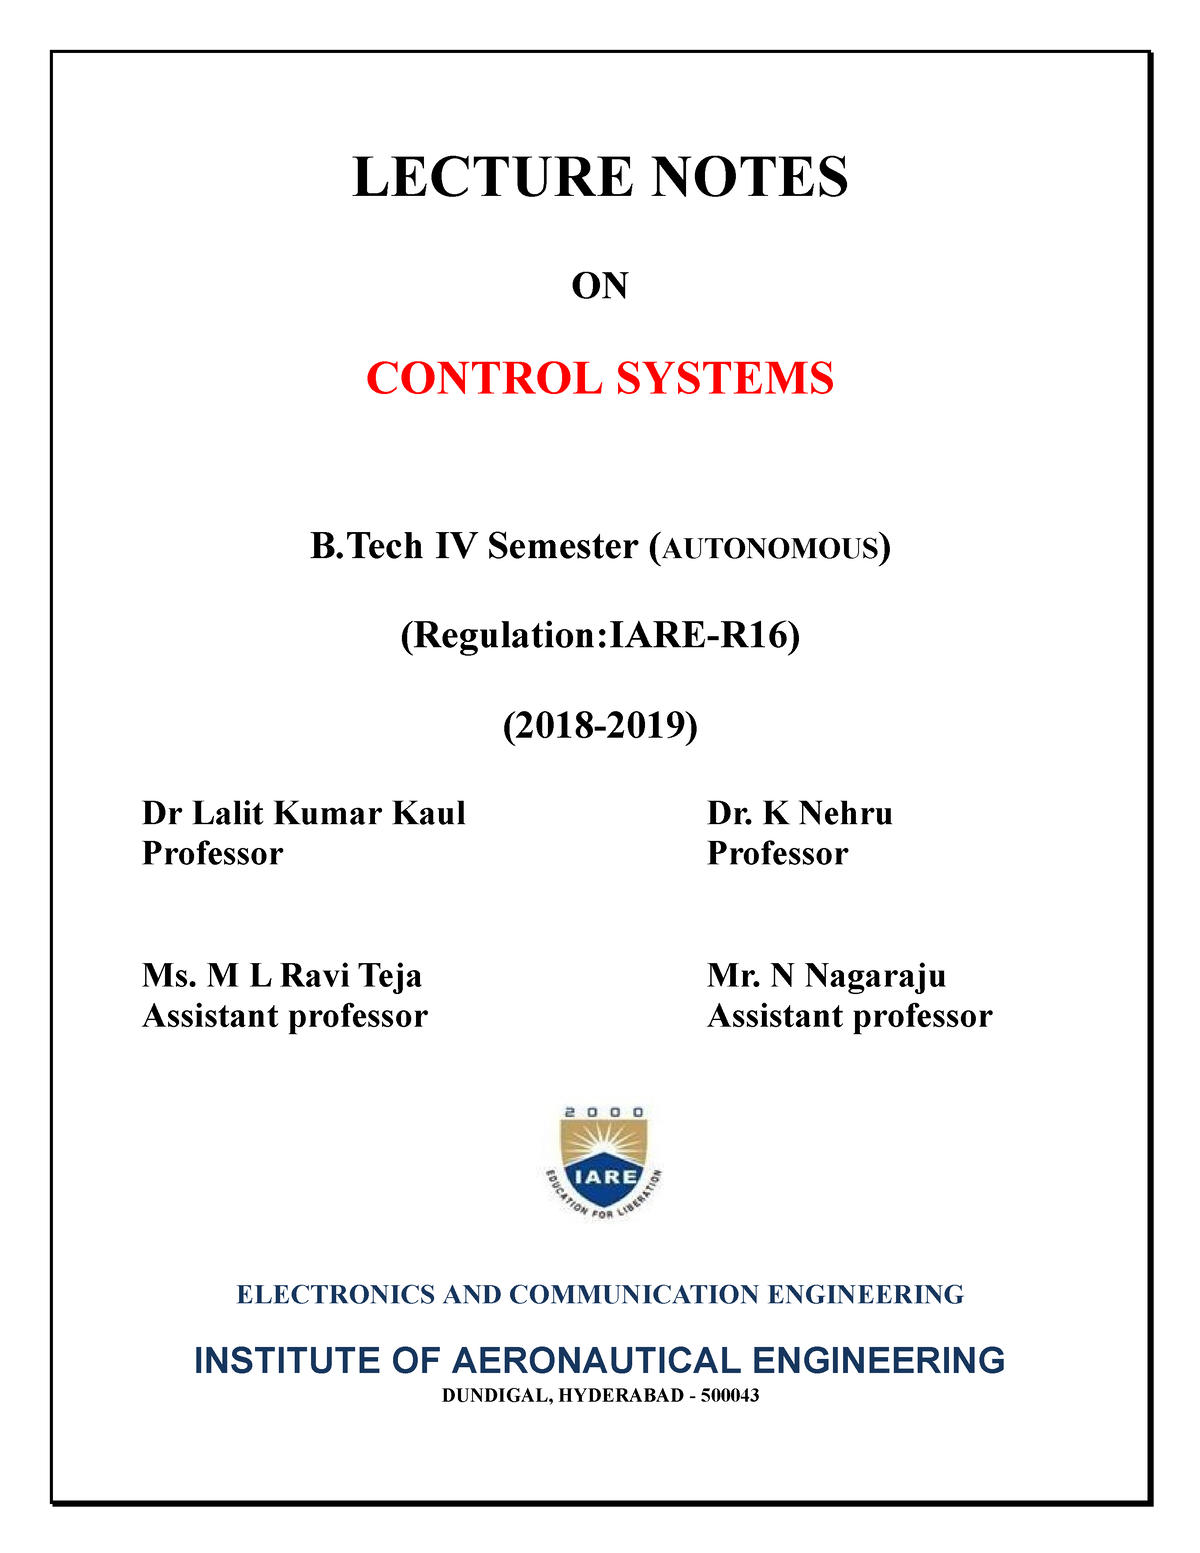 research paper on control systems